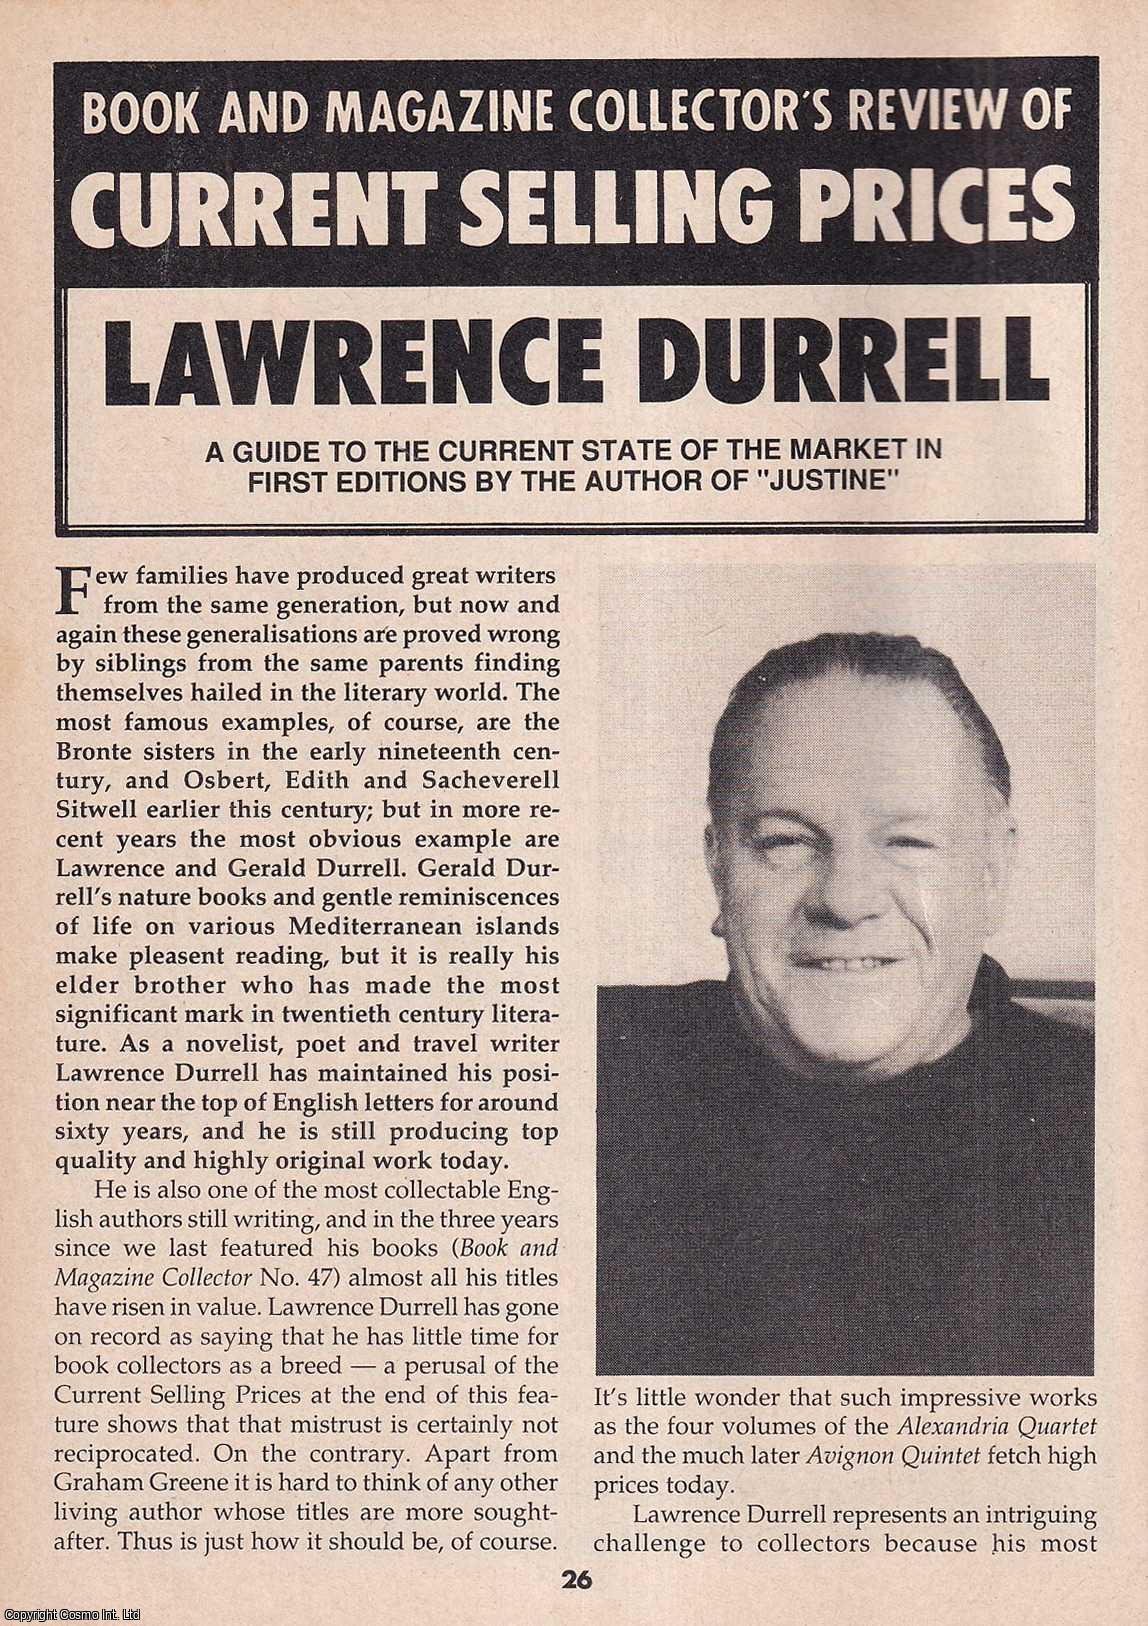 Unstated - Lawrence Durrell : A Guide to The Current State of The Market in First Editions by The Author of Justine. This is an original article separated from an issue of The Book & Magazine Collector publication.